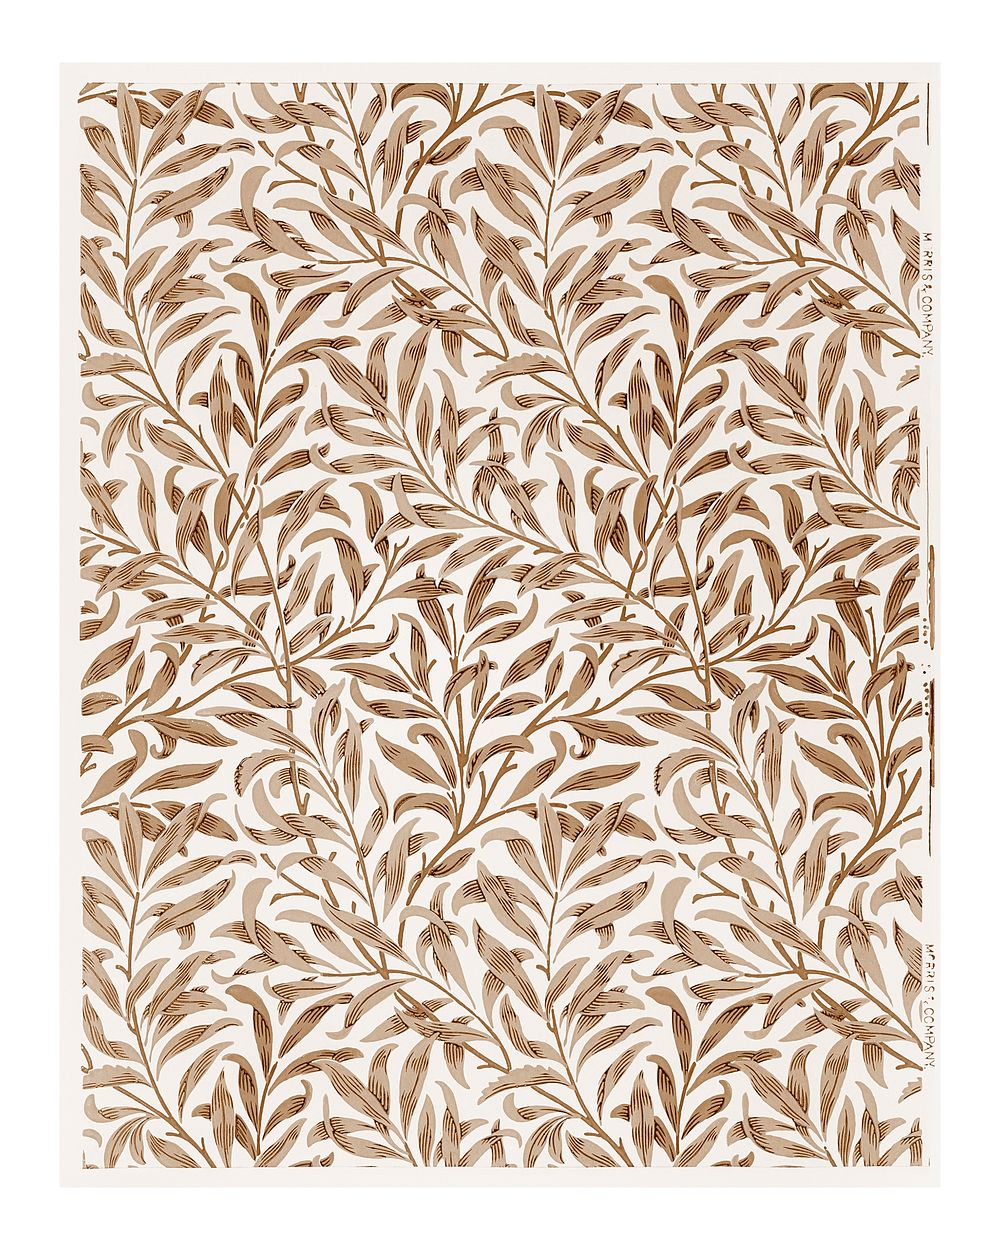 Willow wallpaper pattern wall art print and poster. Remix from original illustration by William Morris.